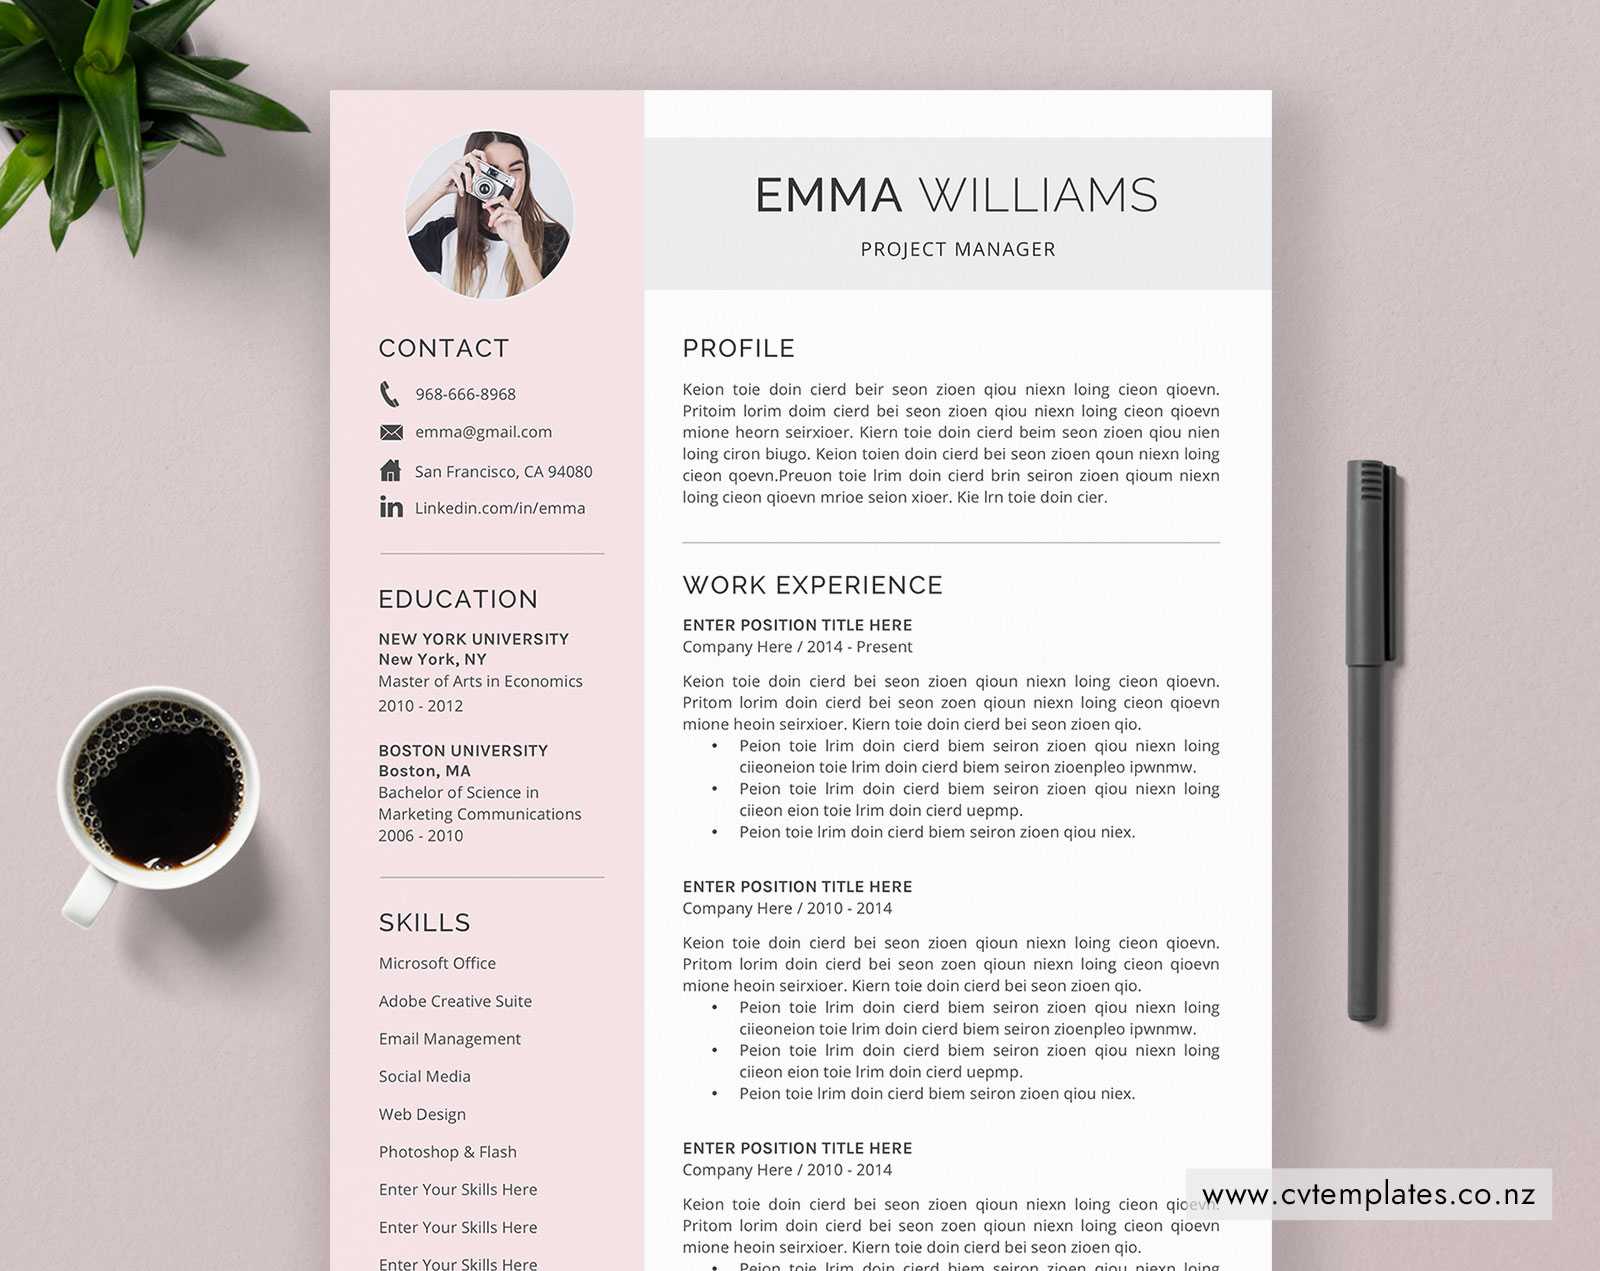 Cv Template For Ms Word, Minimalist Curriculum Vitae, Professional Cv  Template, Cover Letter, Modern & Creative Resume Template Design, Instant Within Resume Templates Microsoft Word 2010